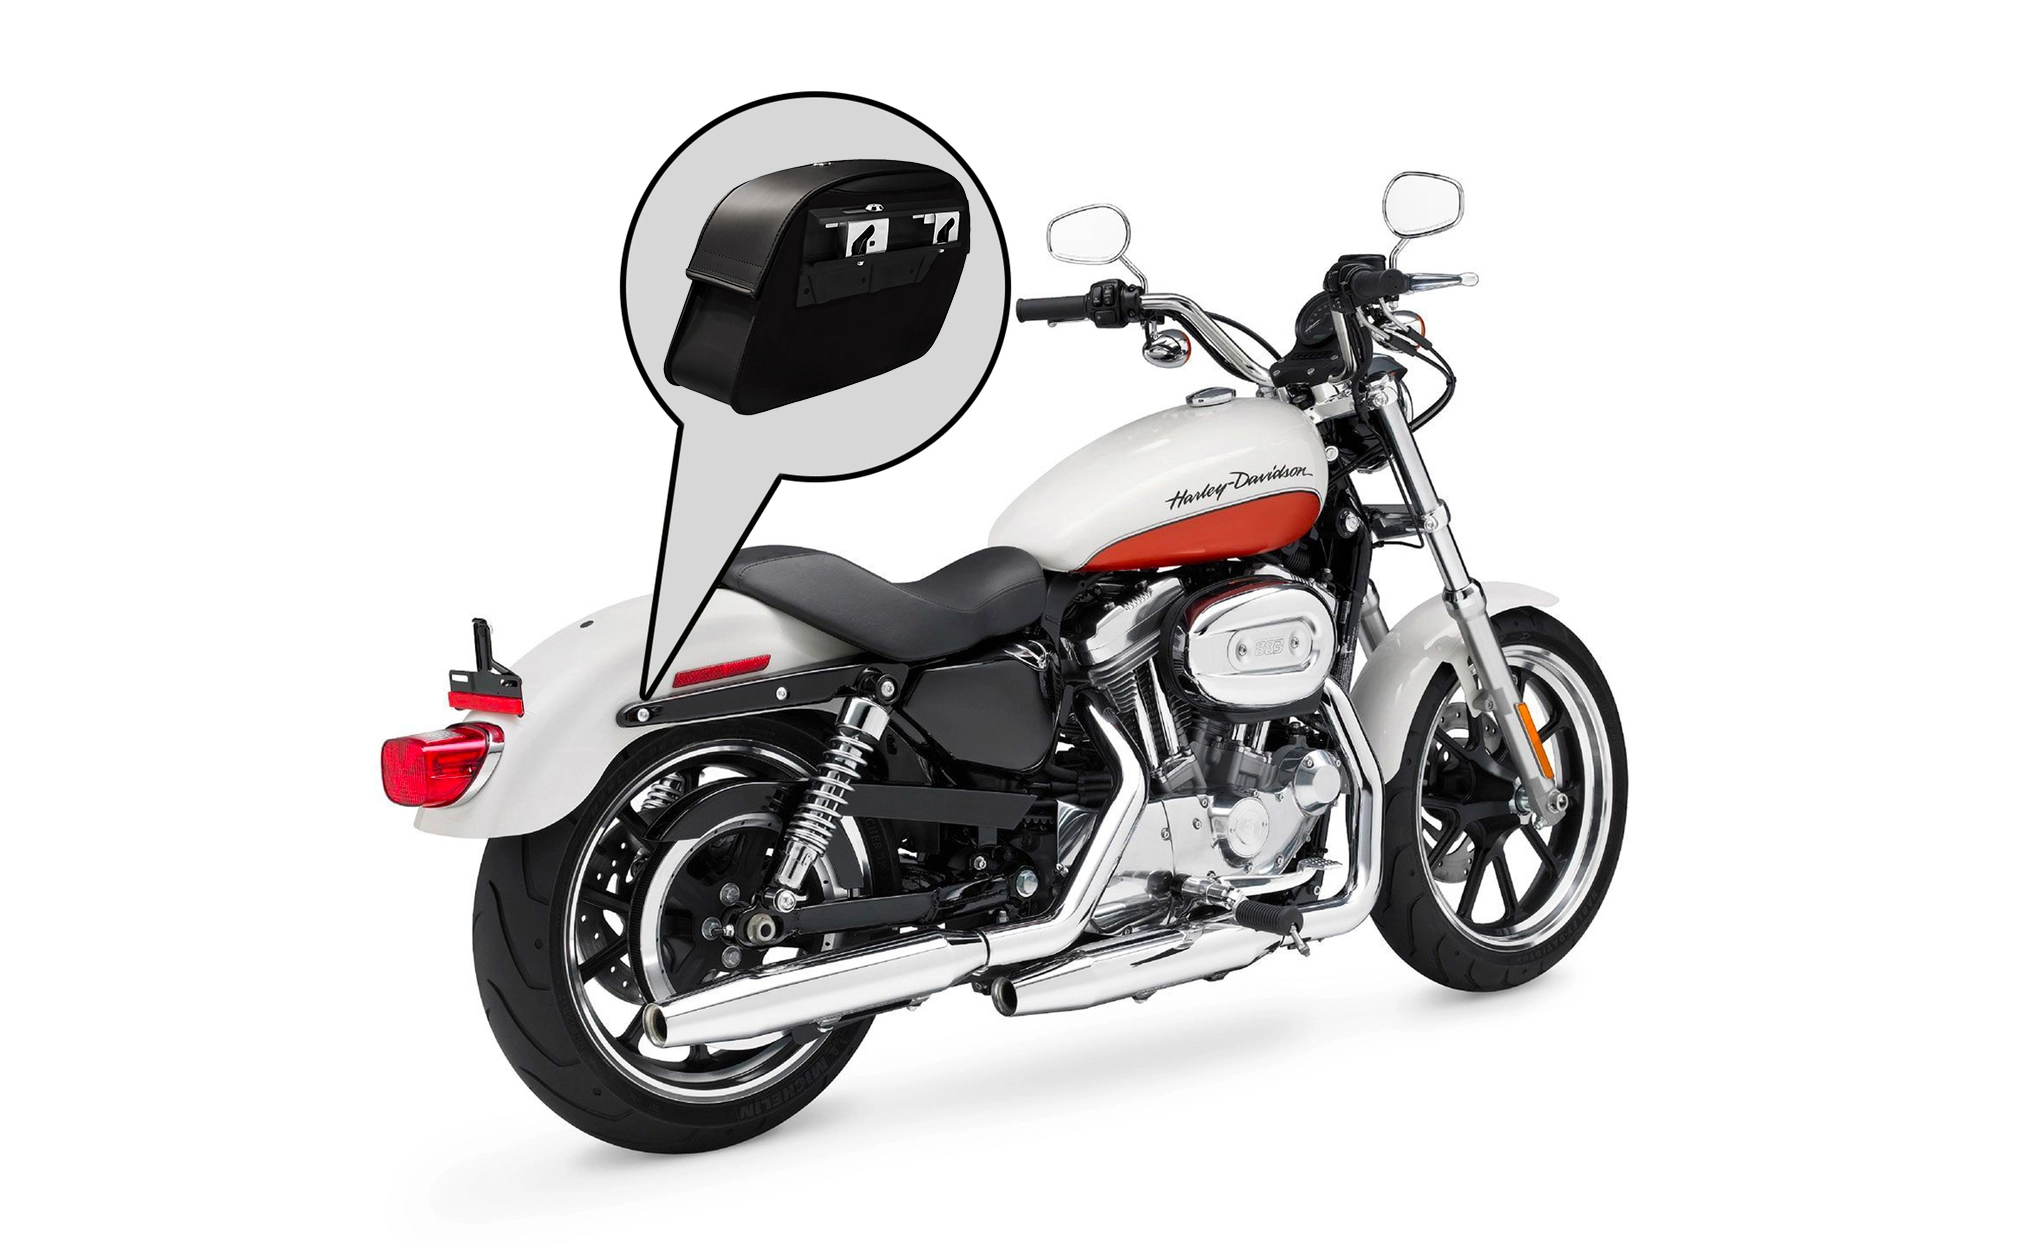 Viking Saddlebags Quick Disconnect System For Indian Scout Bag on Bike View @expand